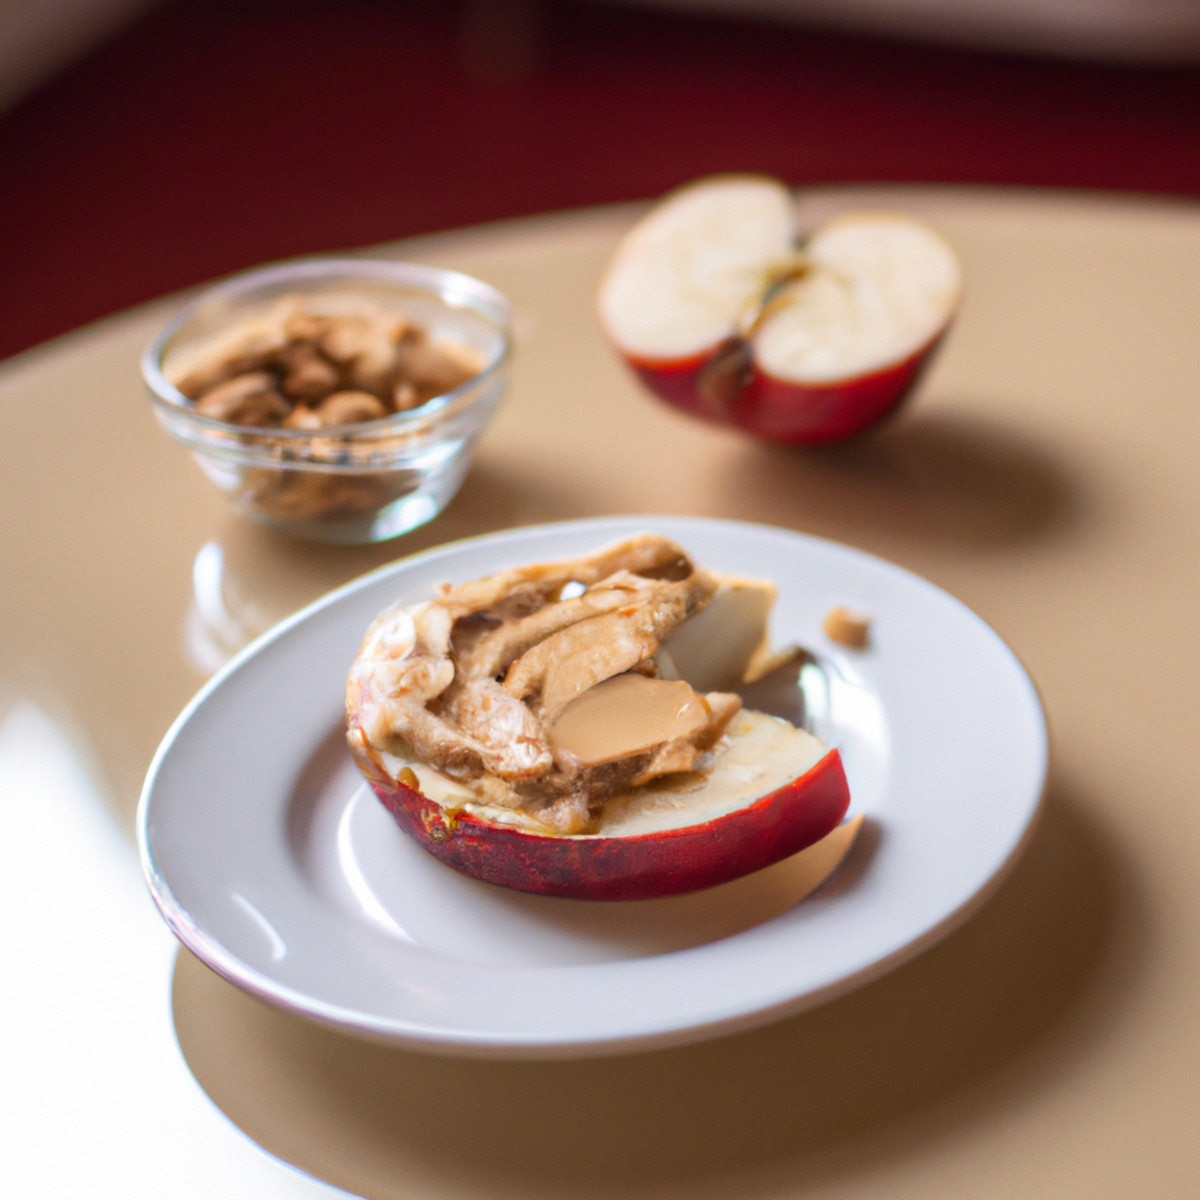 peanut butter and apples